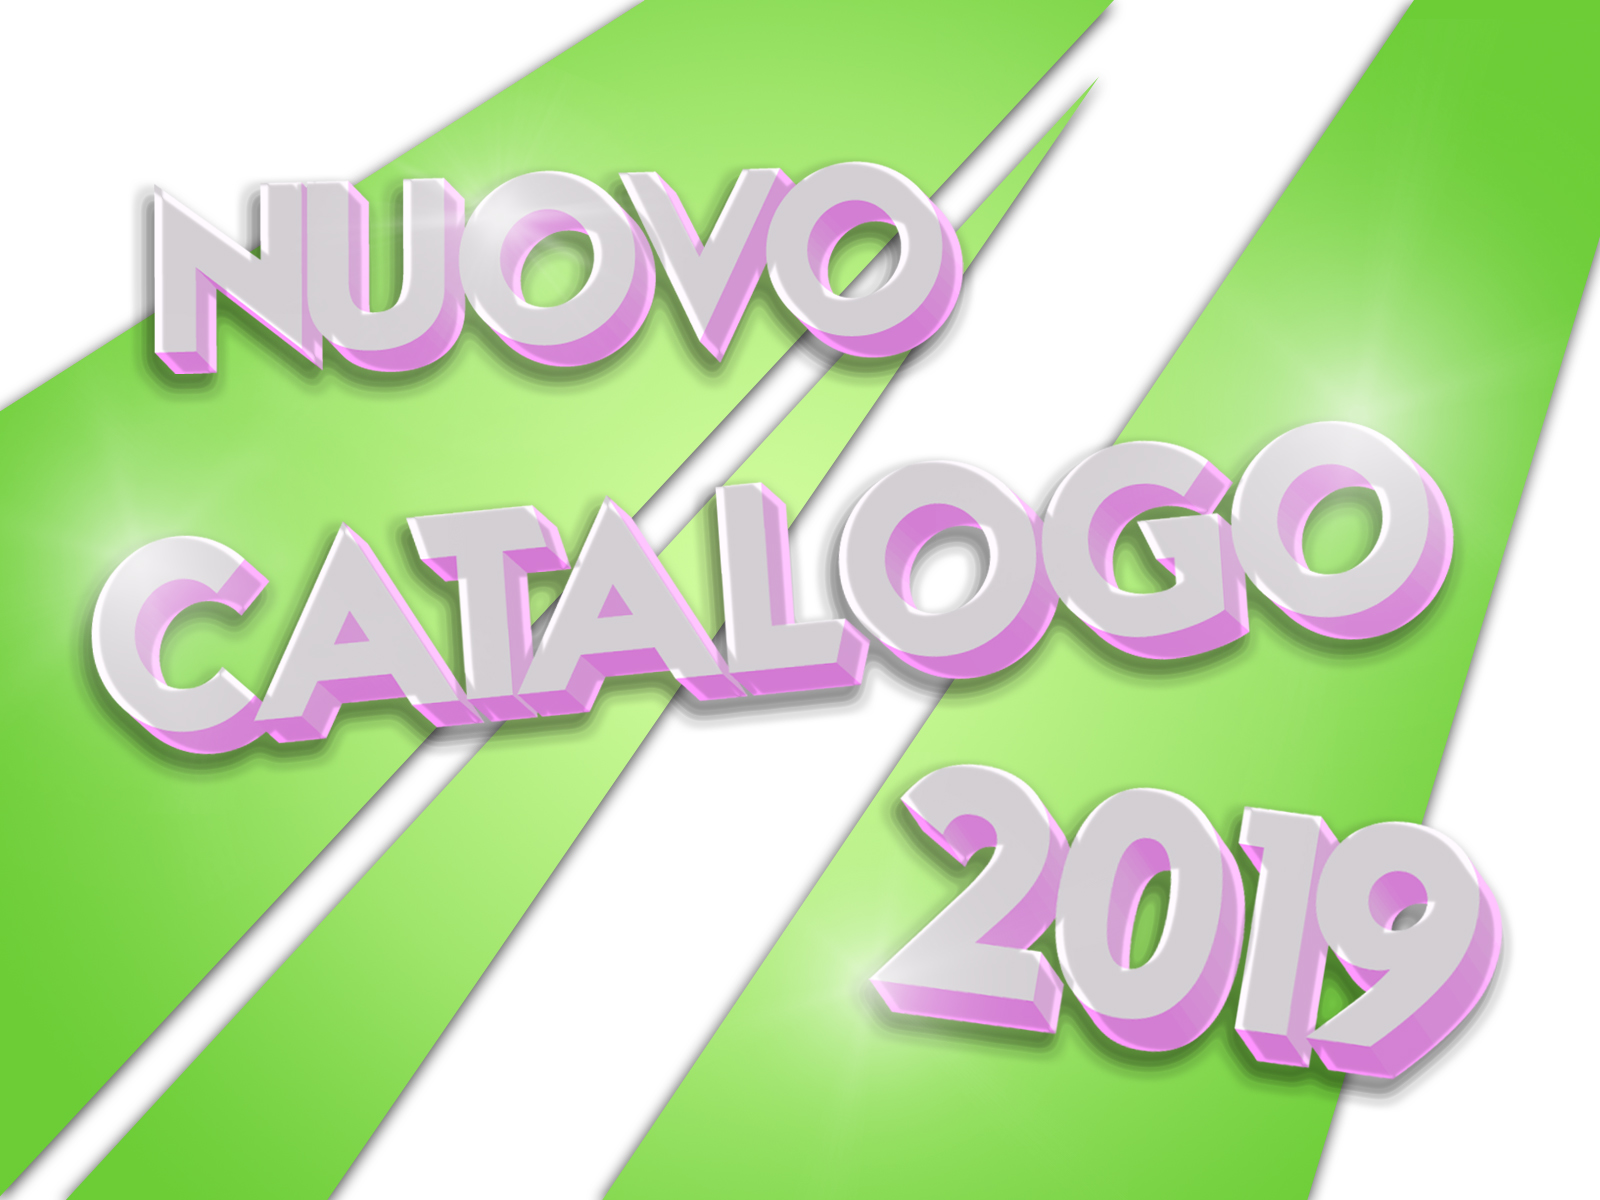 You are currently viewing Nuovo catalogo 2019